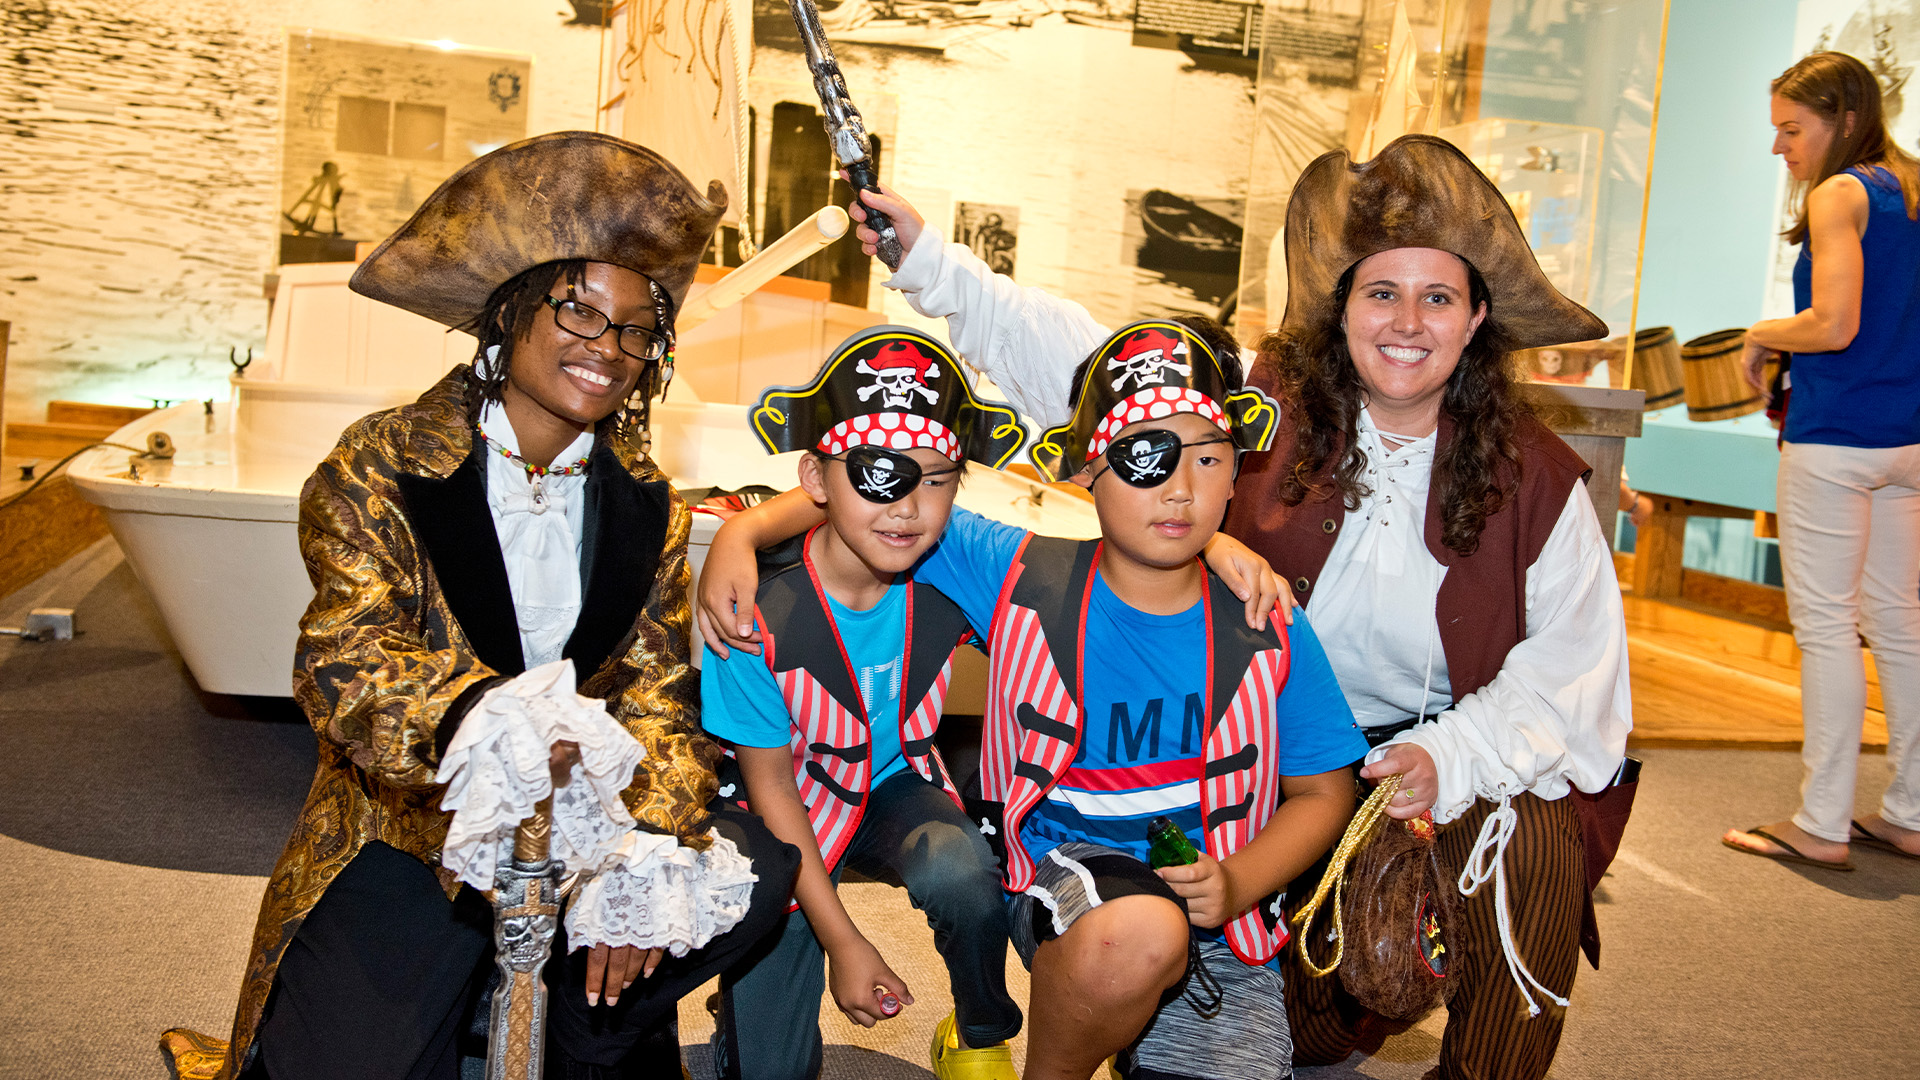 Two female pirates with children at the museum.